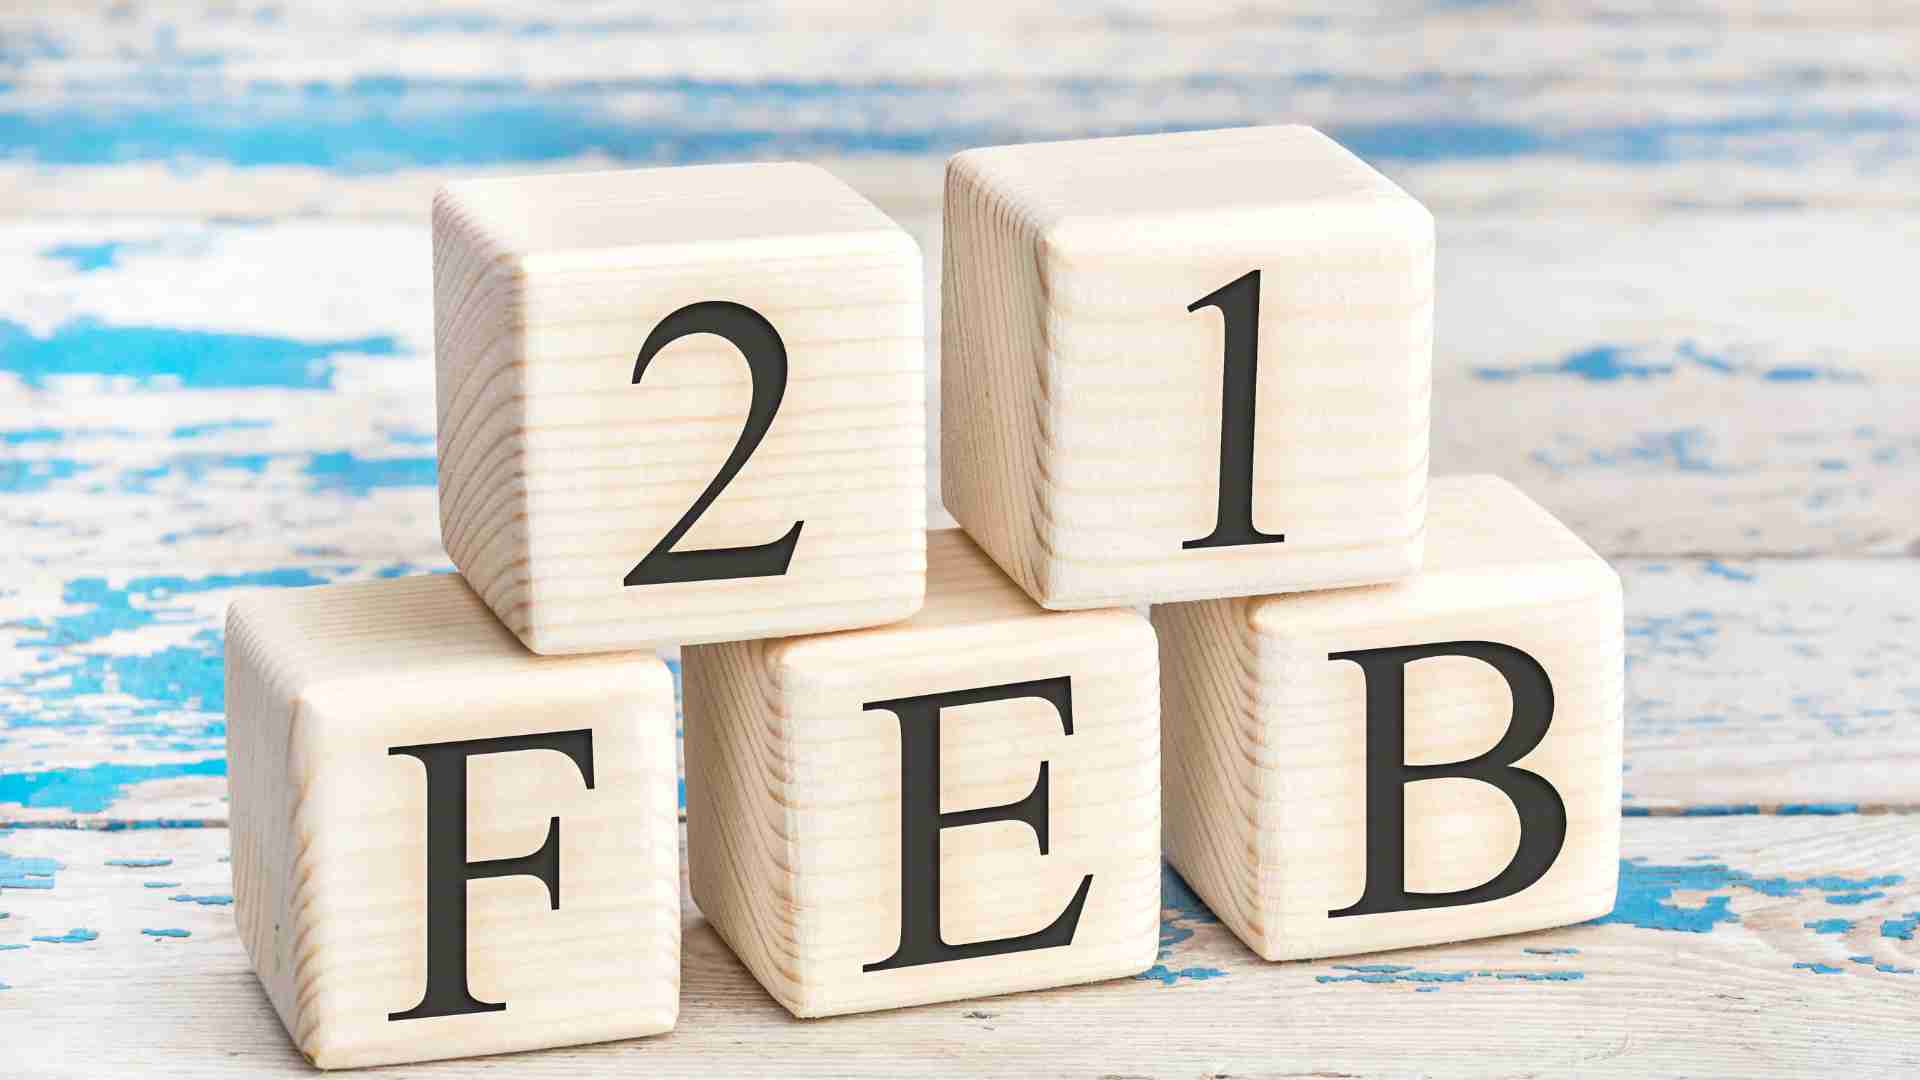 February 21 will not be the only day when retirees aged 62 or older can receive a new payment in the USA